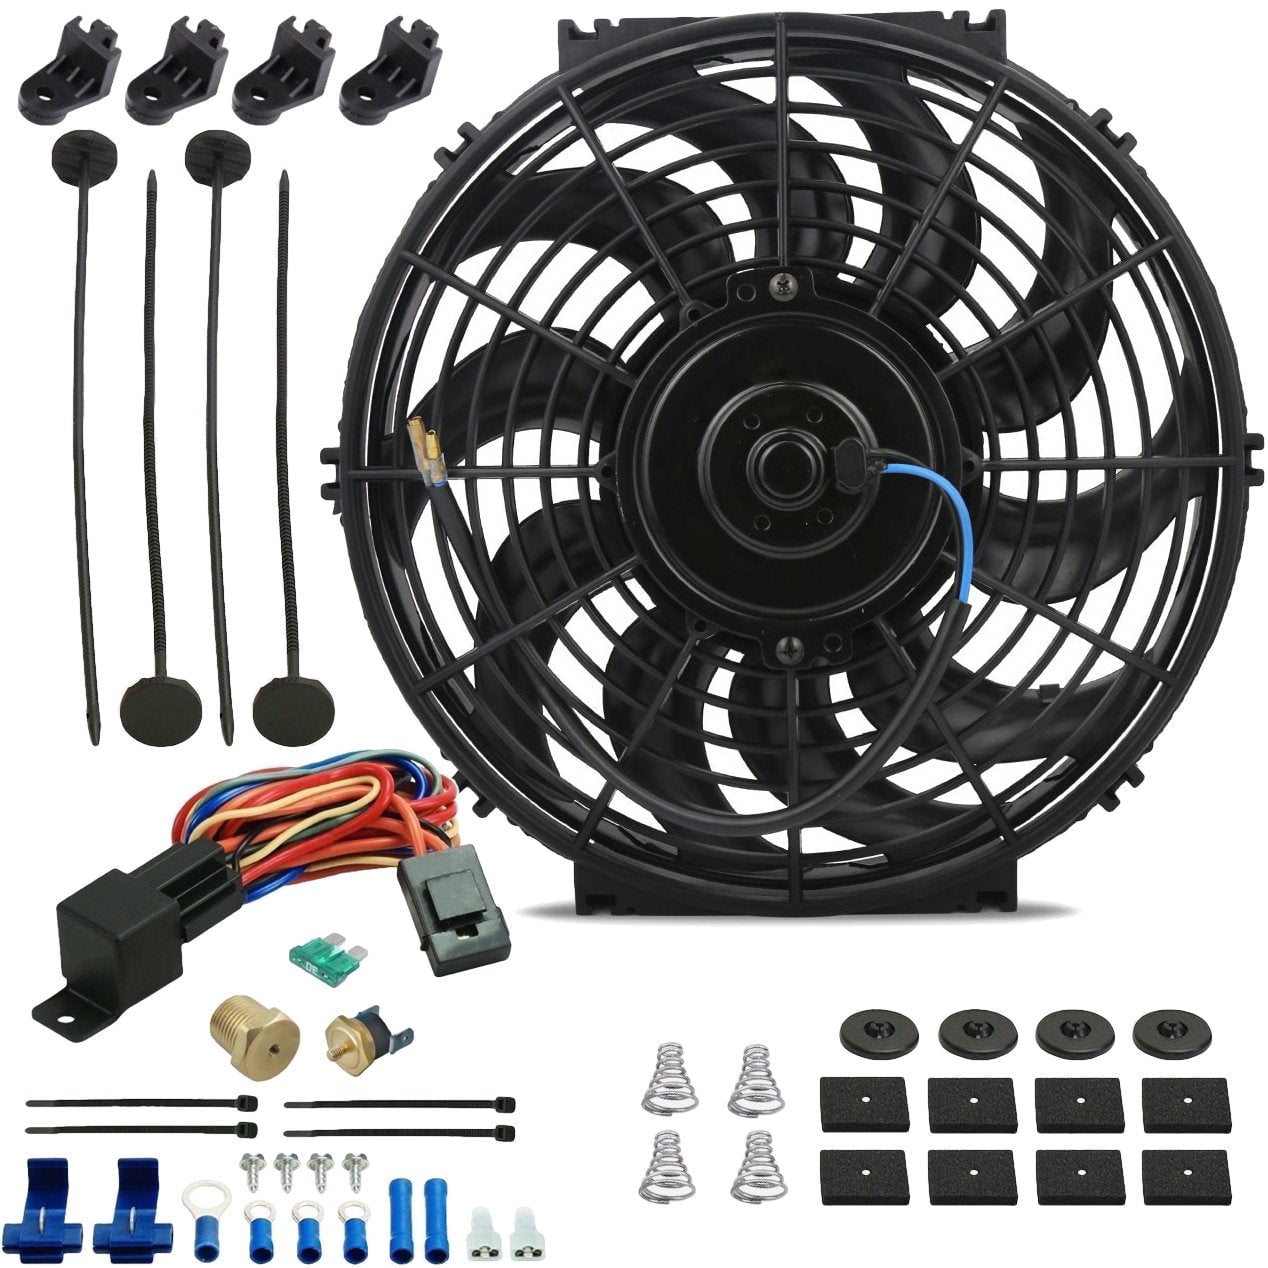 DUAL ELECTRIC RADIATOR ENGINE COOLING FANS THERMOSTAT SENSOR KIT THREAD-IN PROBE 